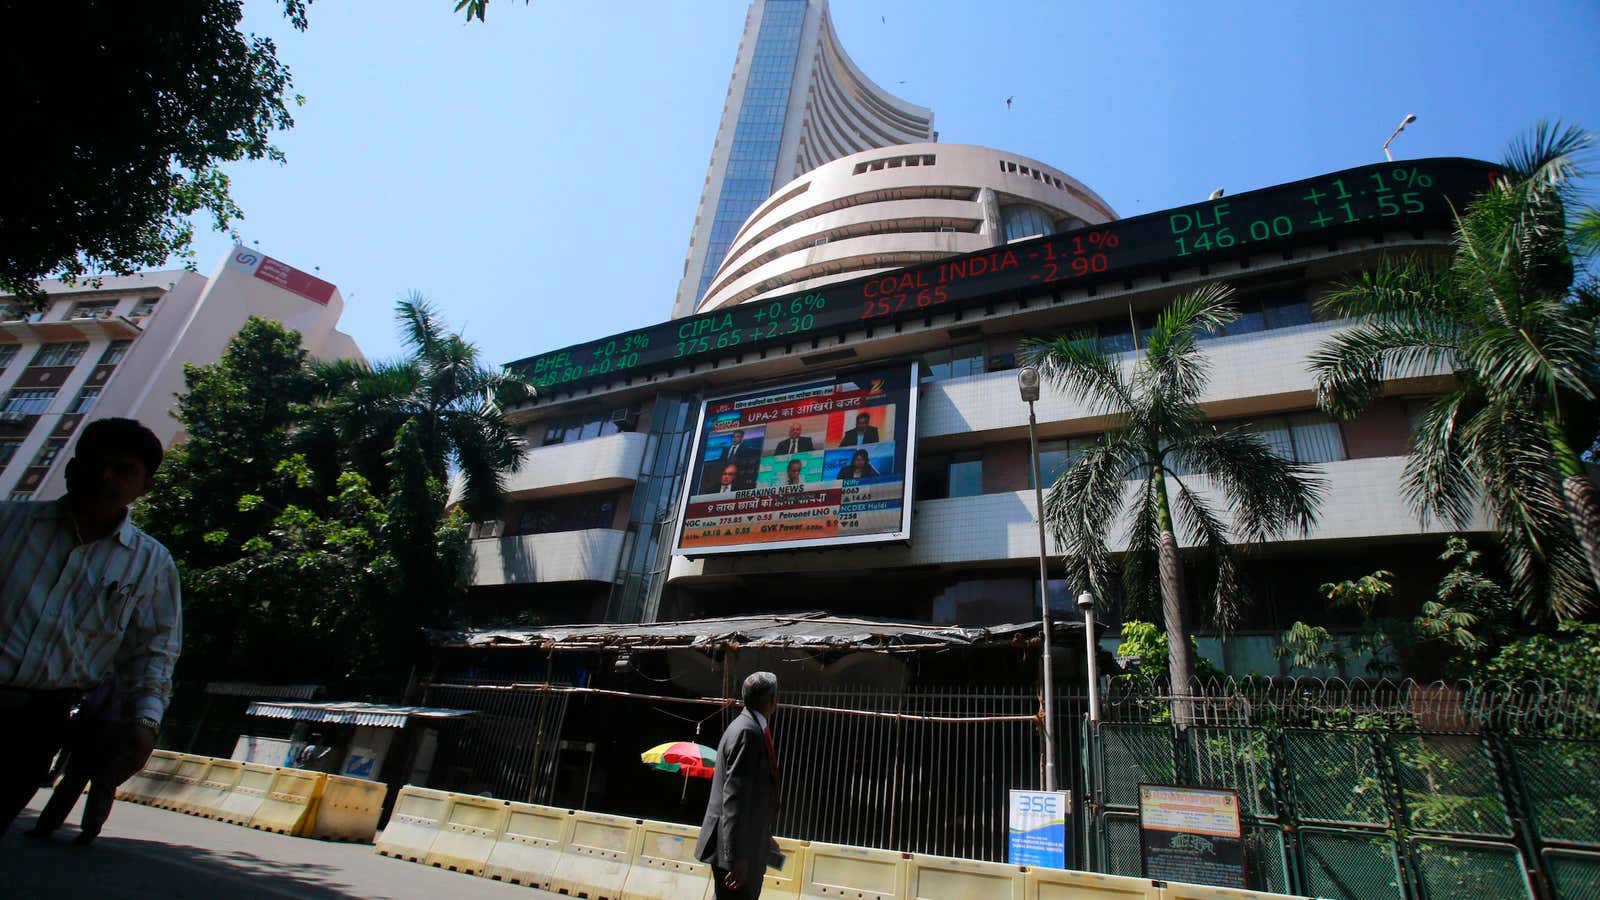 The Bombay Stock Exchange is the center of the action.